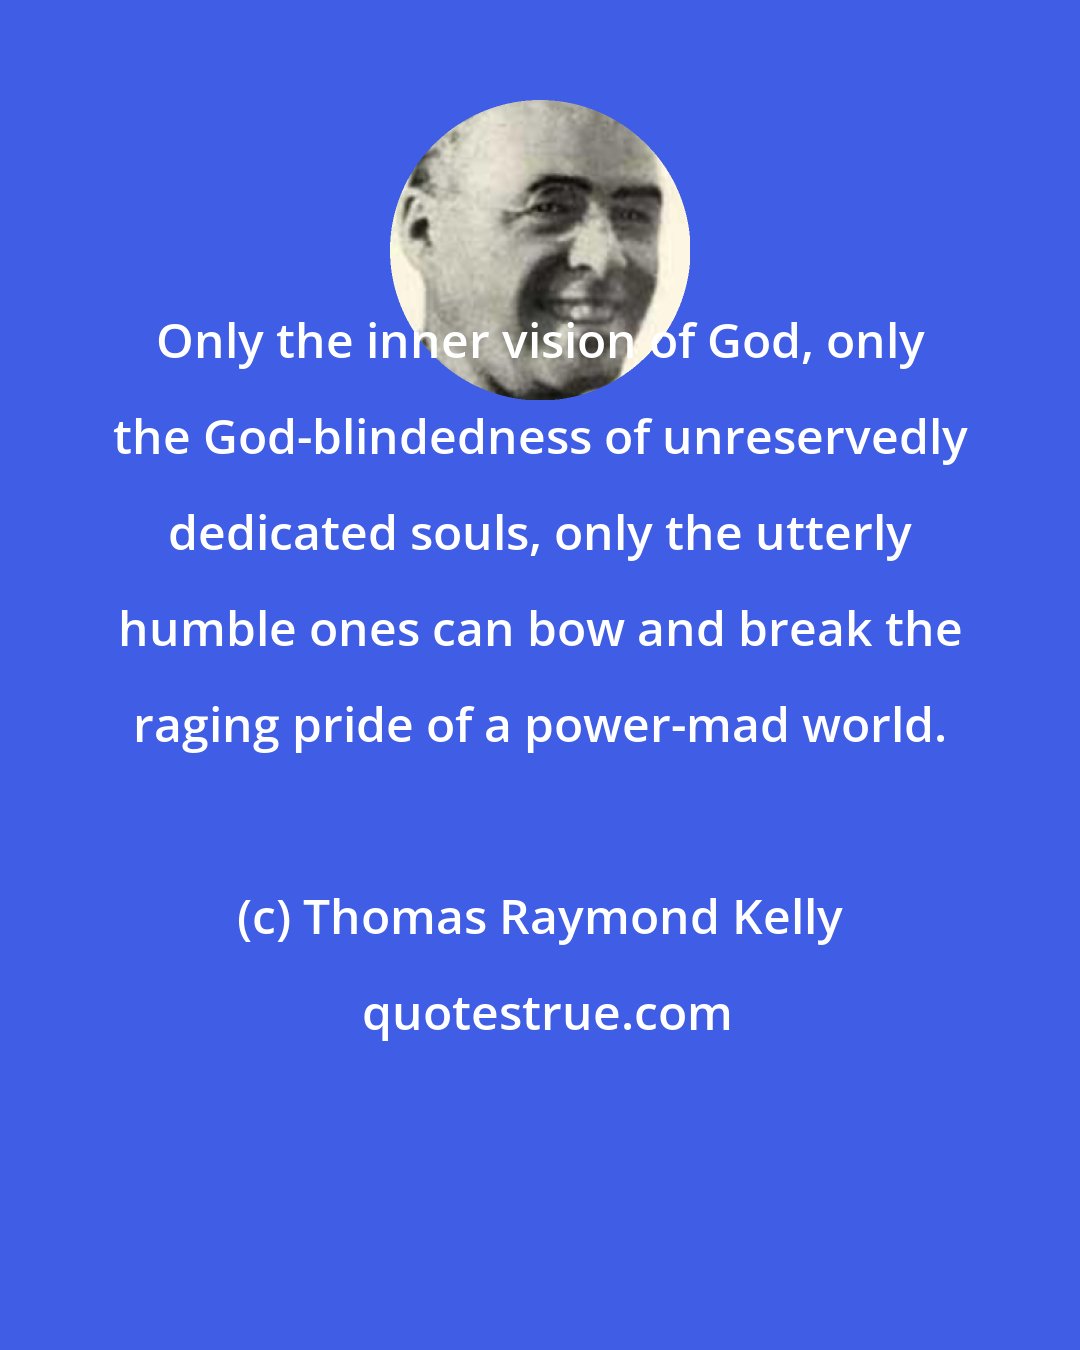 Thomas Raymond Kelly: Only the inner vision of God, only the God-blindedness of unreservedly dedicated souls, only the utterly humble ones can bow and break the raging pride of a power-mad world.